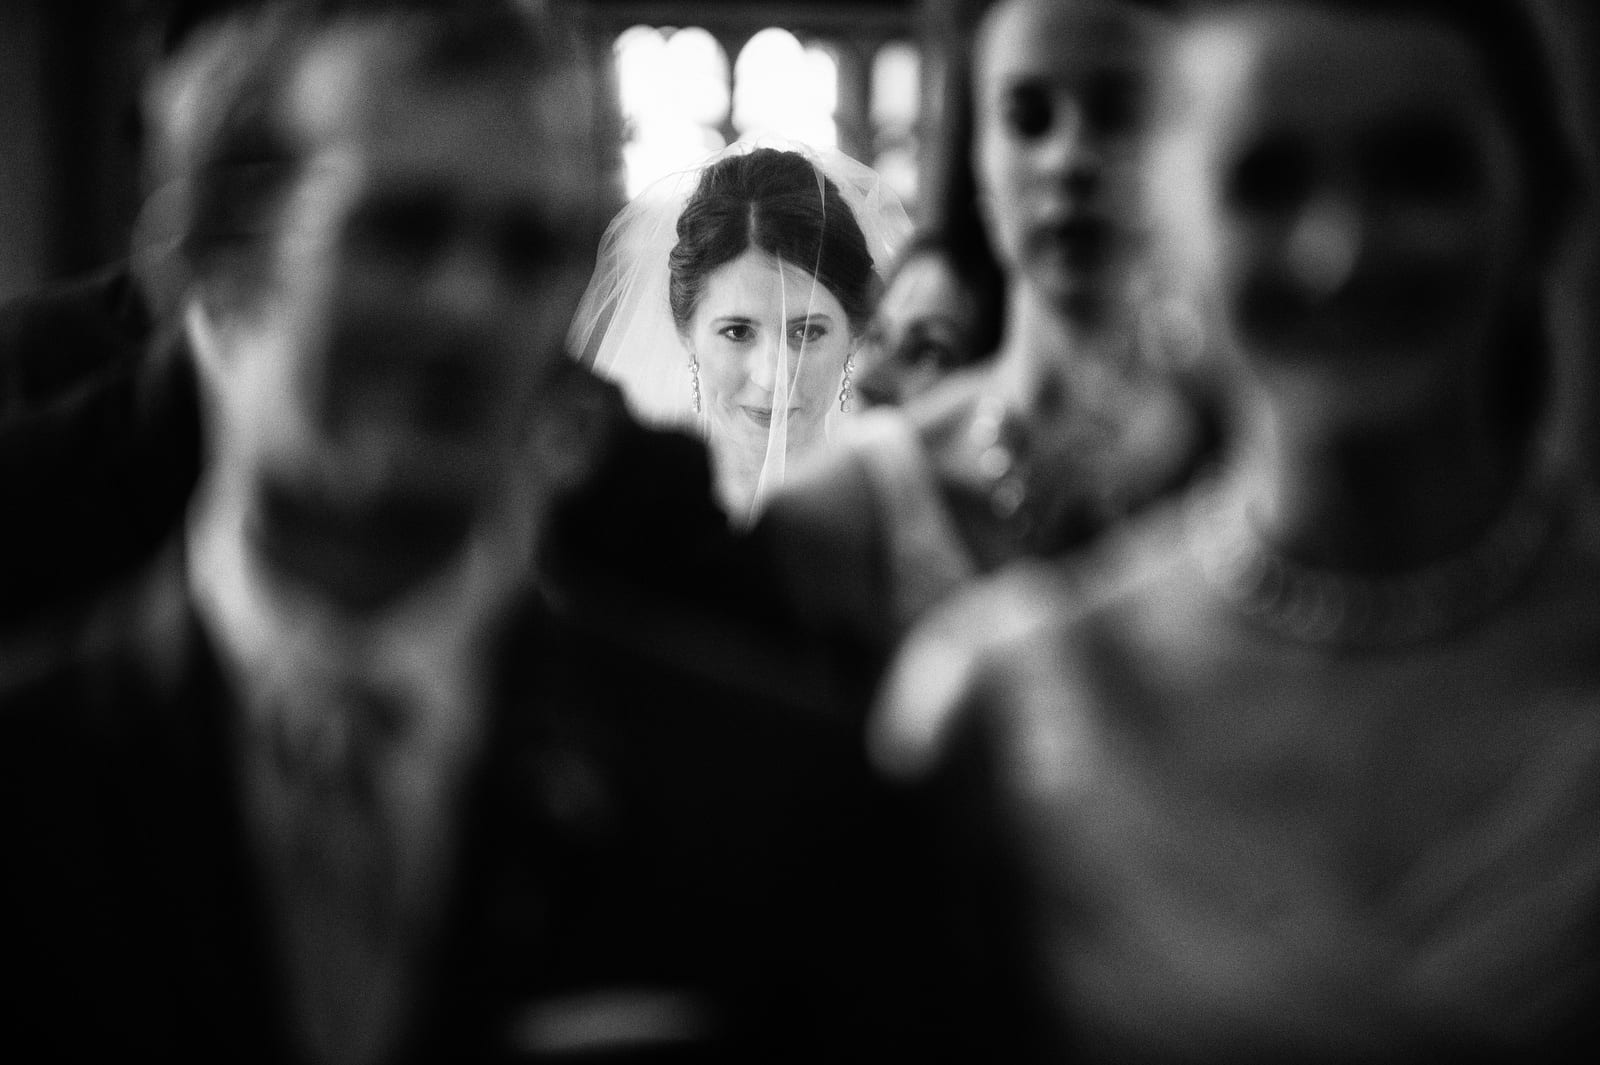 A bride looks forward in concentration as seen through the line of bridesmaids and groomsmen at her wedding at St. Paul Cathedral in Pittsburgh.